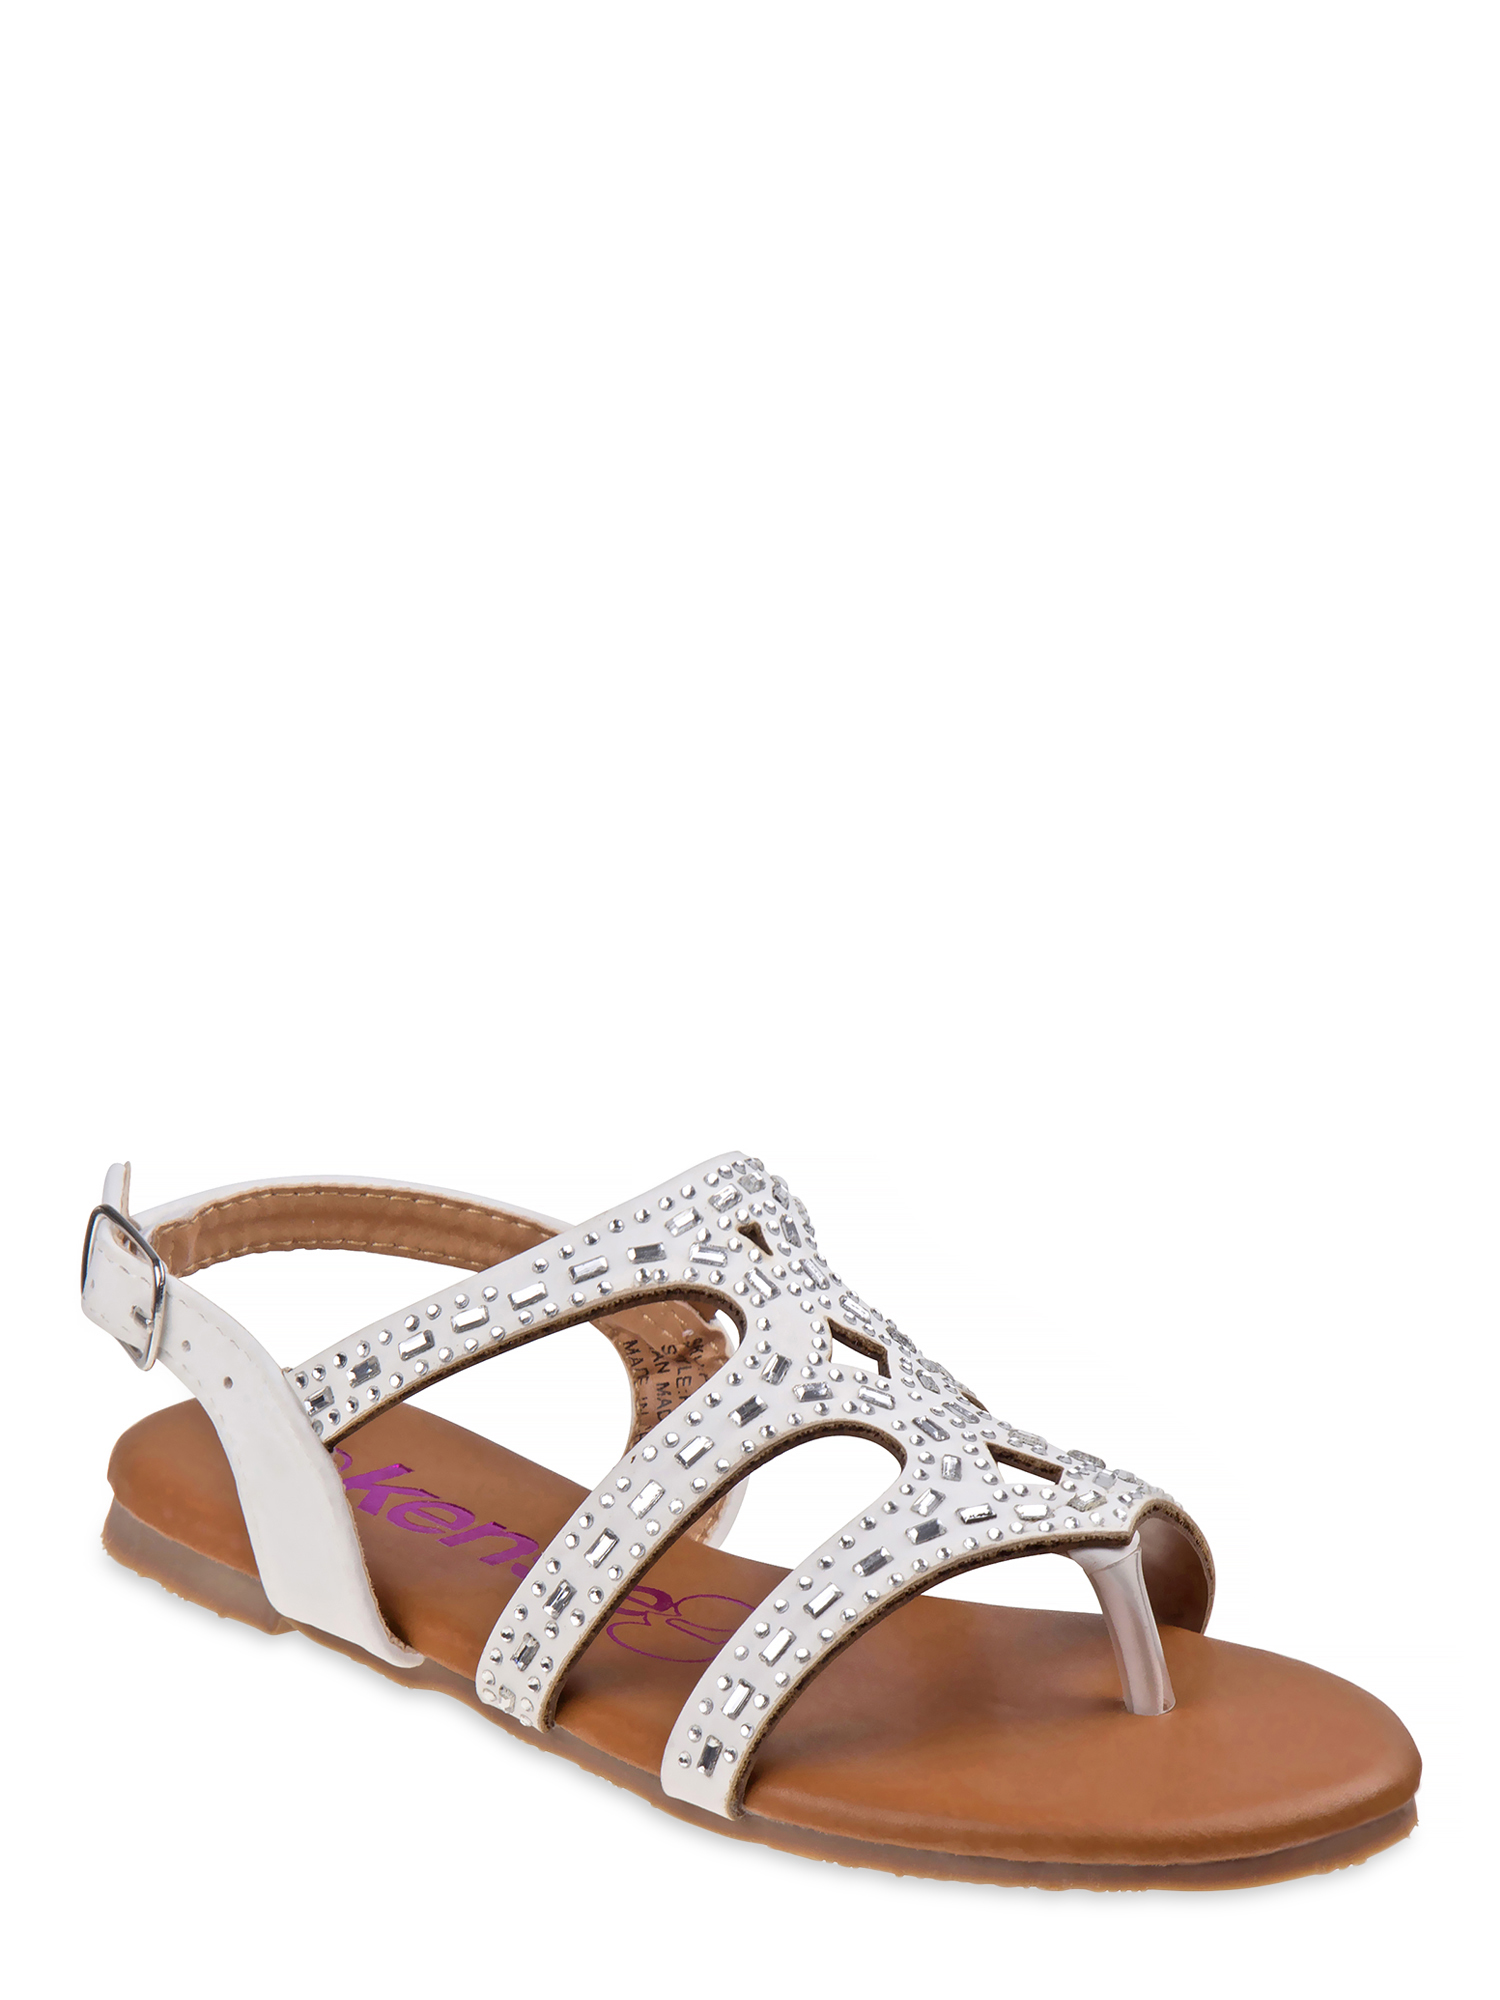 Kensie Girl open-toe Glitter Stud Encrusted Strappy Sandals - image 1 of 5